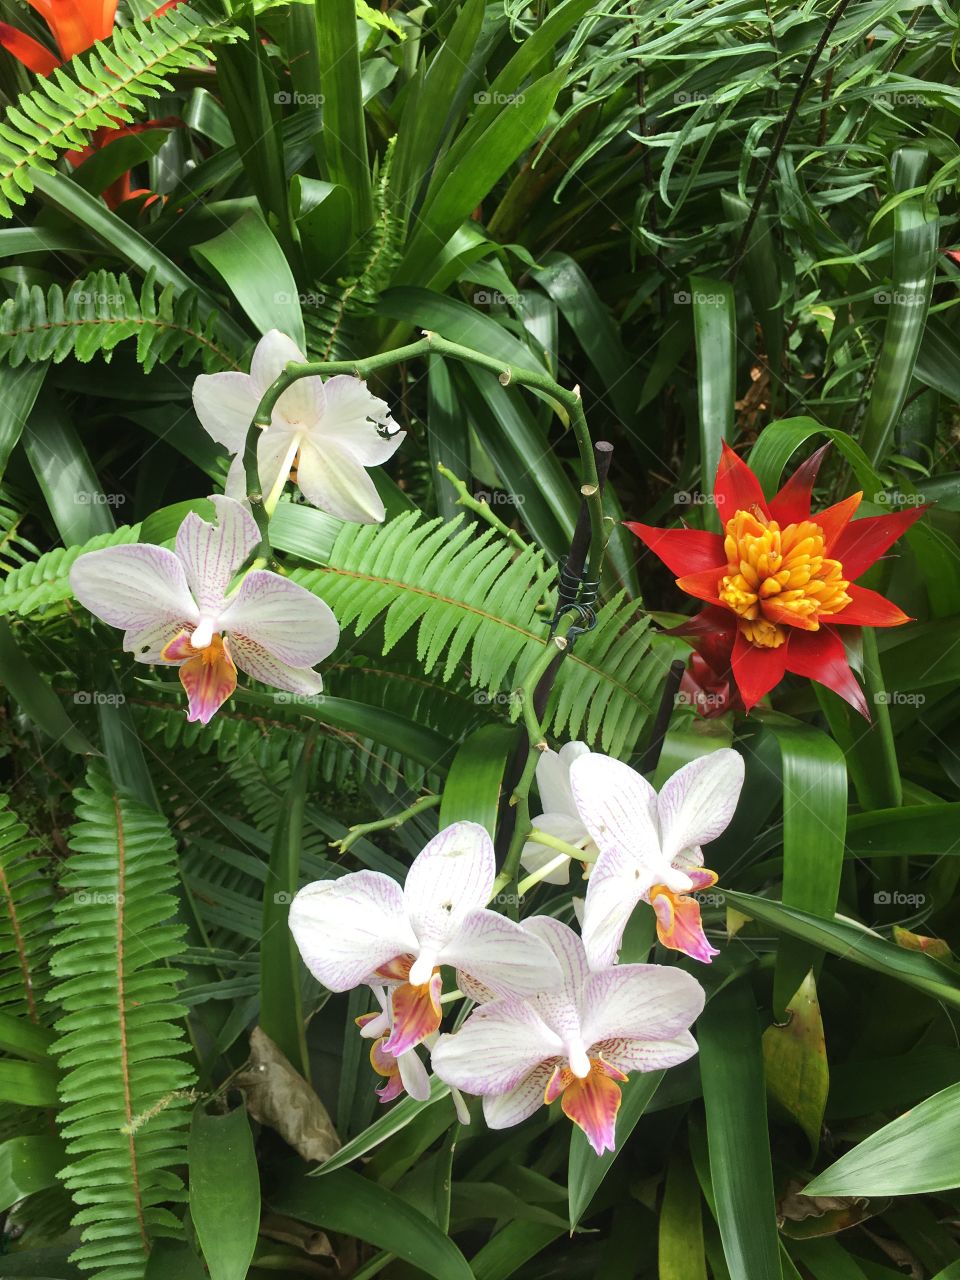 Tropical plants, green ferns, white and pink flowers, red and yellow flowers, rainforest 